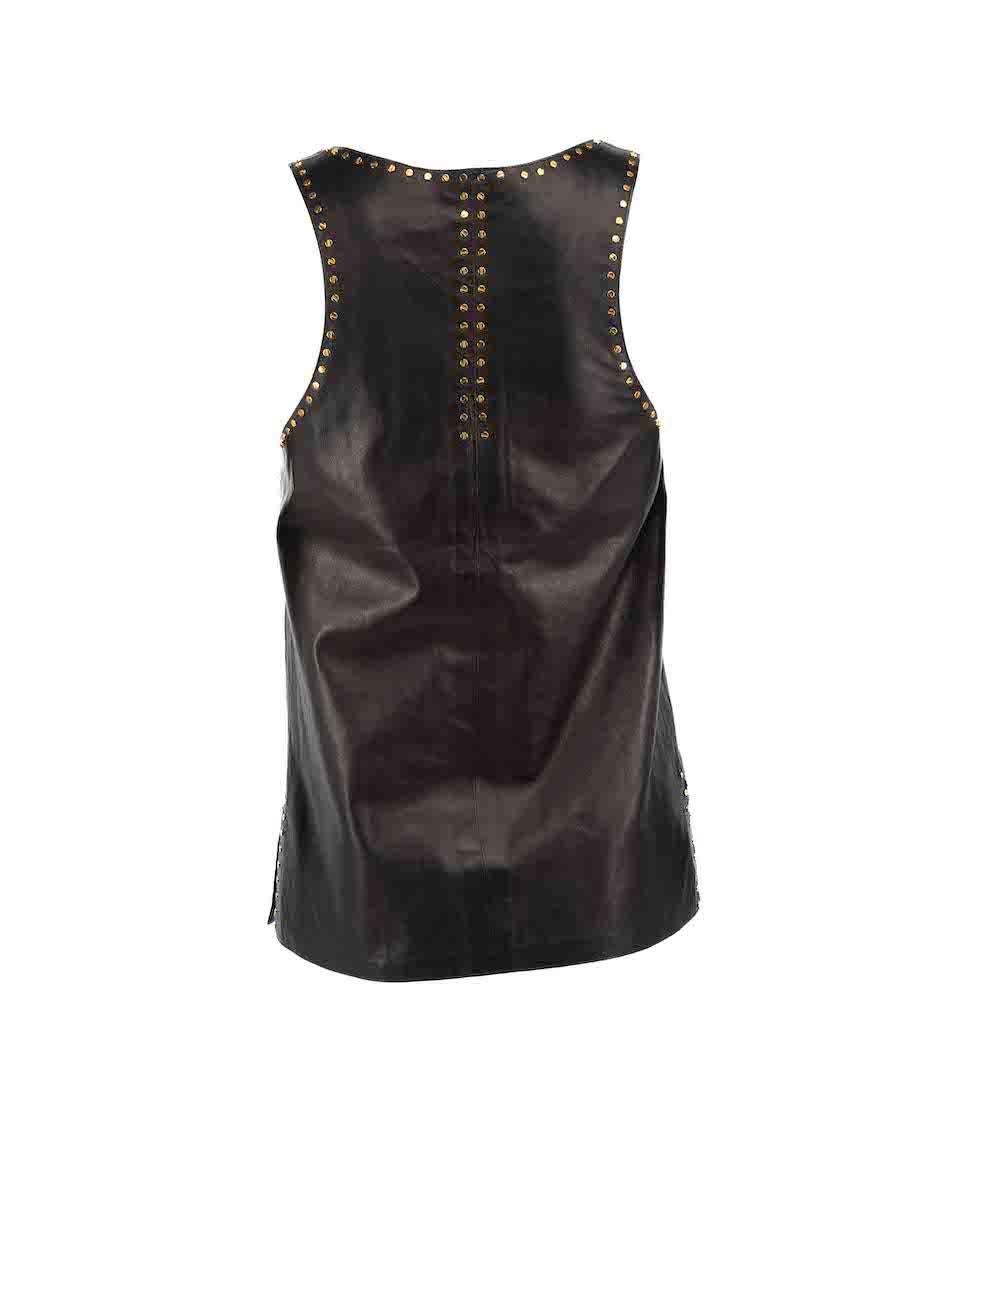 Tom Ford Black Leather Studded Tank Top Size XS In Good Condition For Sale In London, GB